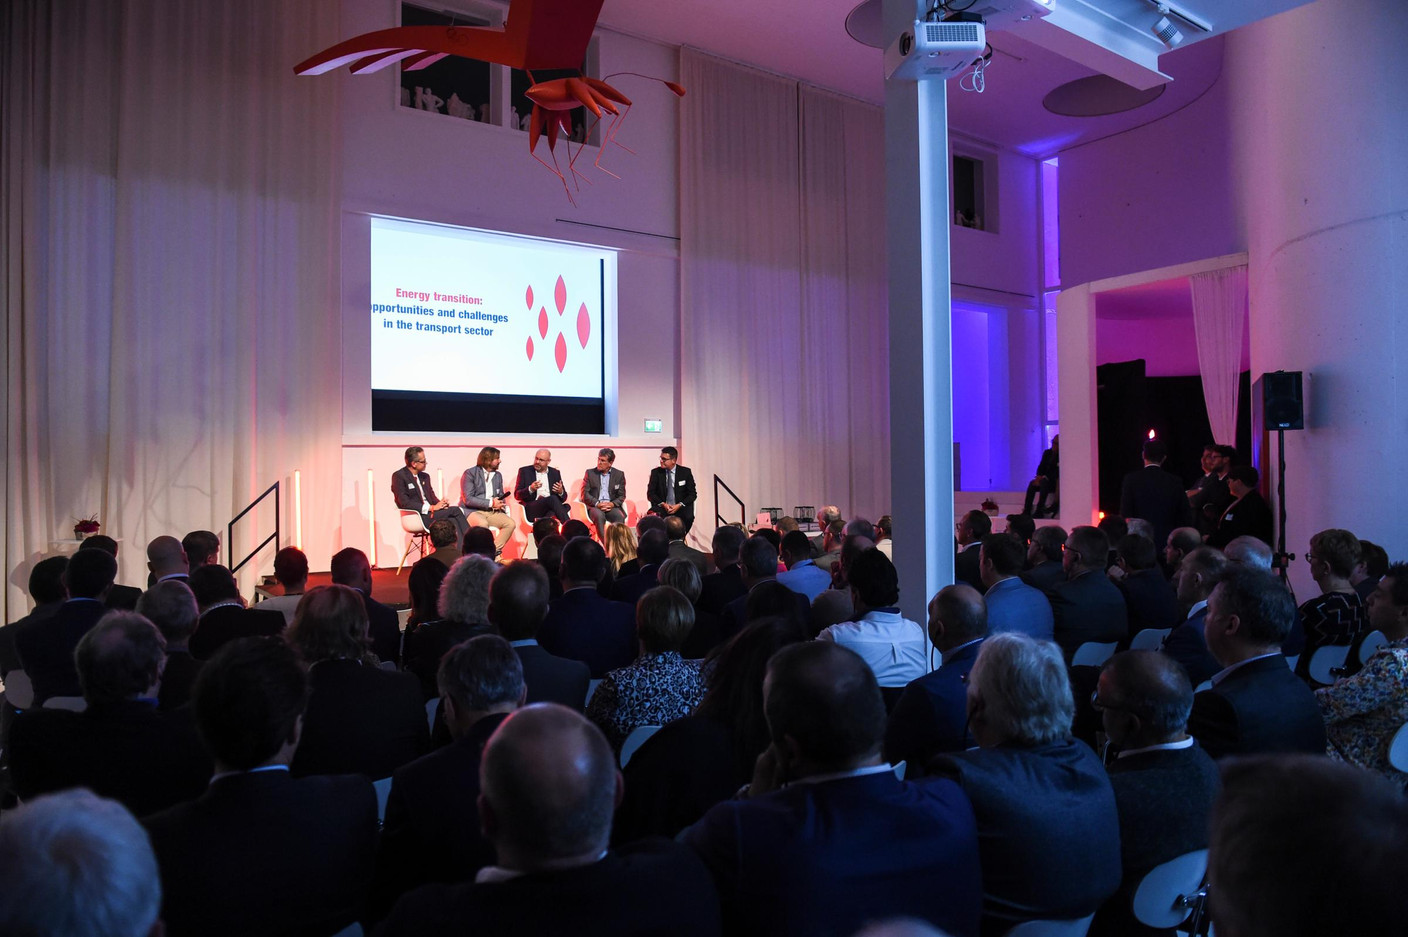 Table ronde sur le thème: «Energy transition: opportunities and challenges in the transport sector» (Photo: Total Luxembourg)